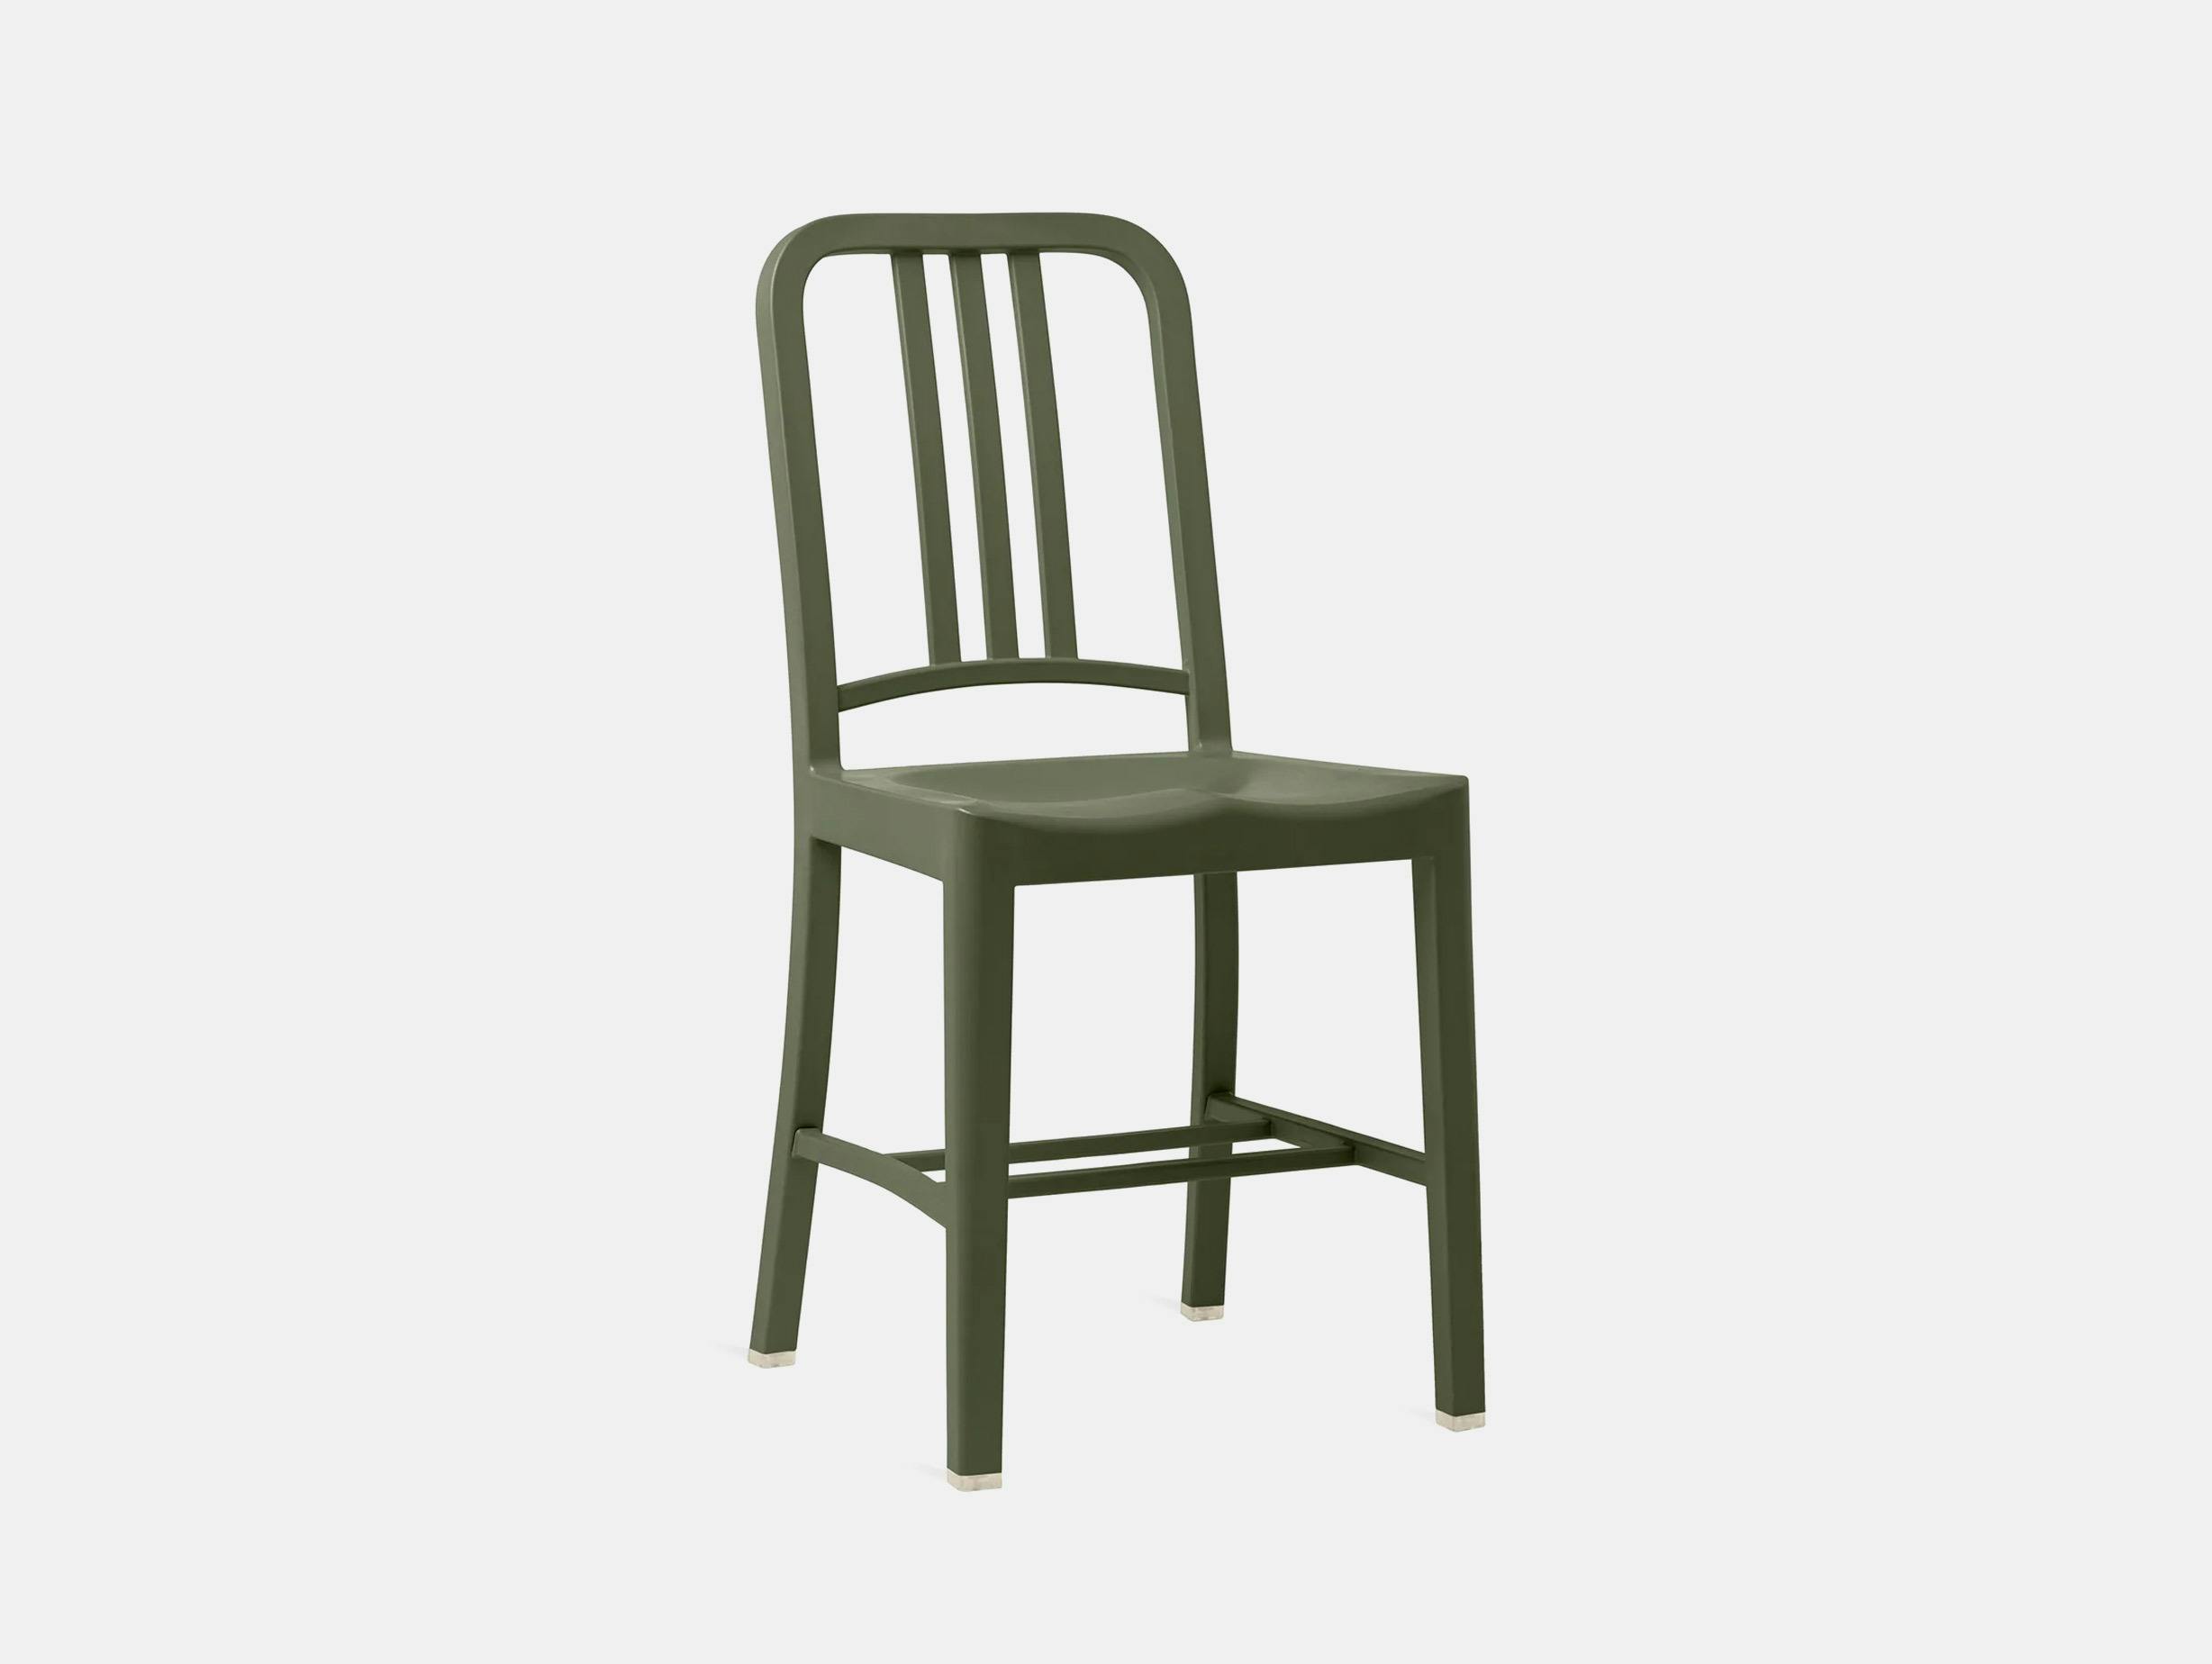 Emeco 111 navy chair cypress green